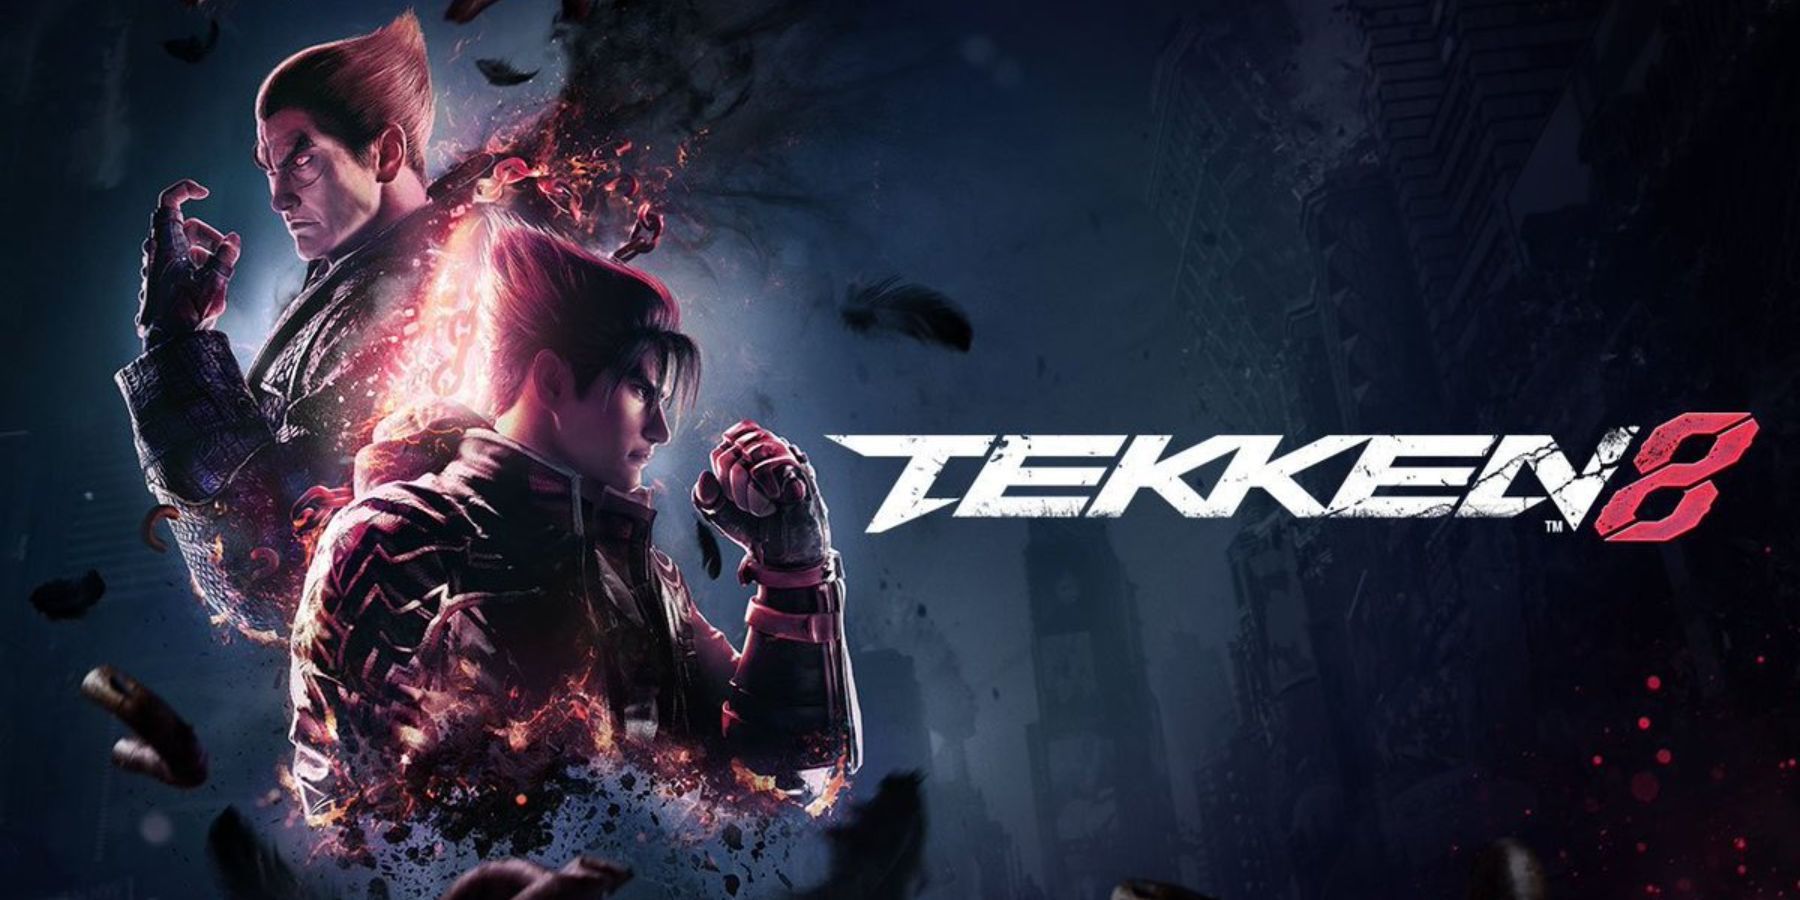 Does Tekken 8 have crossplay across PC, PS5, and Xbox?